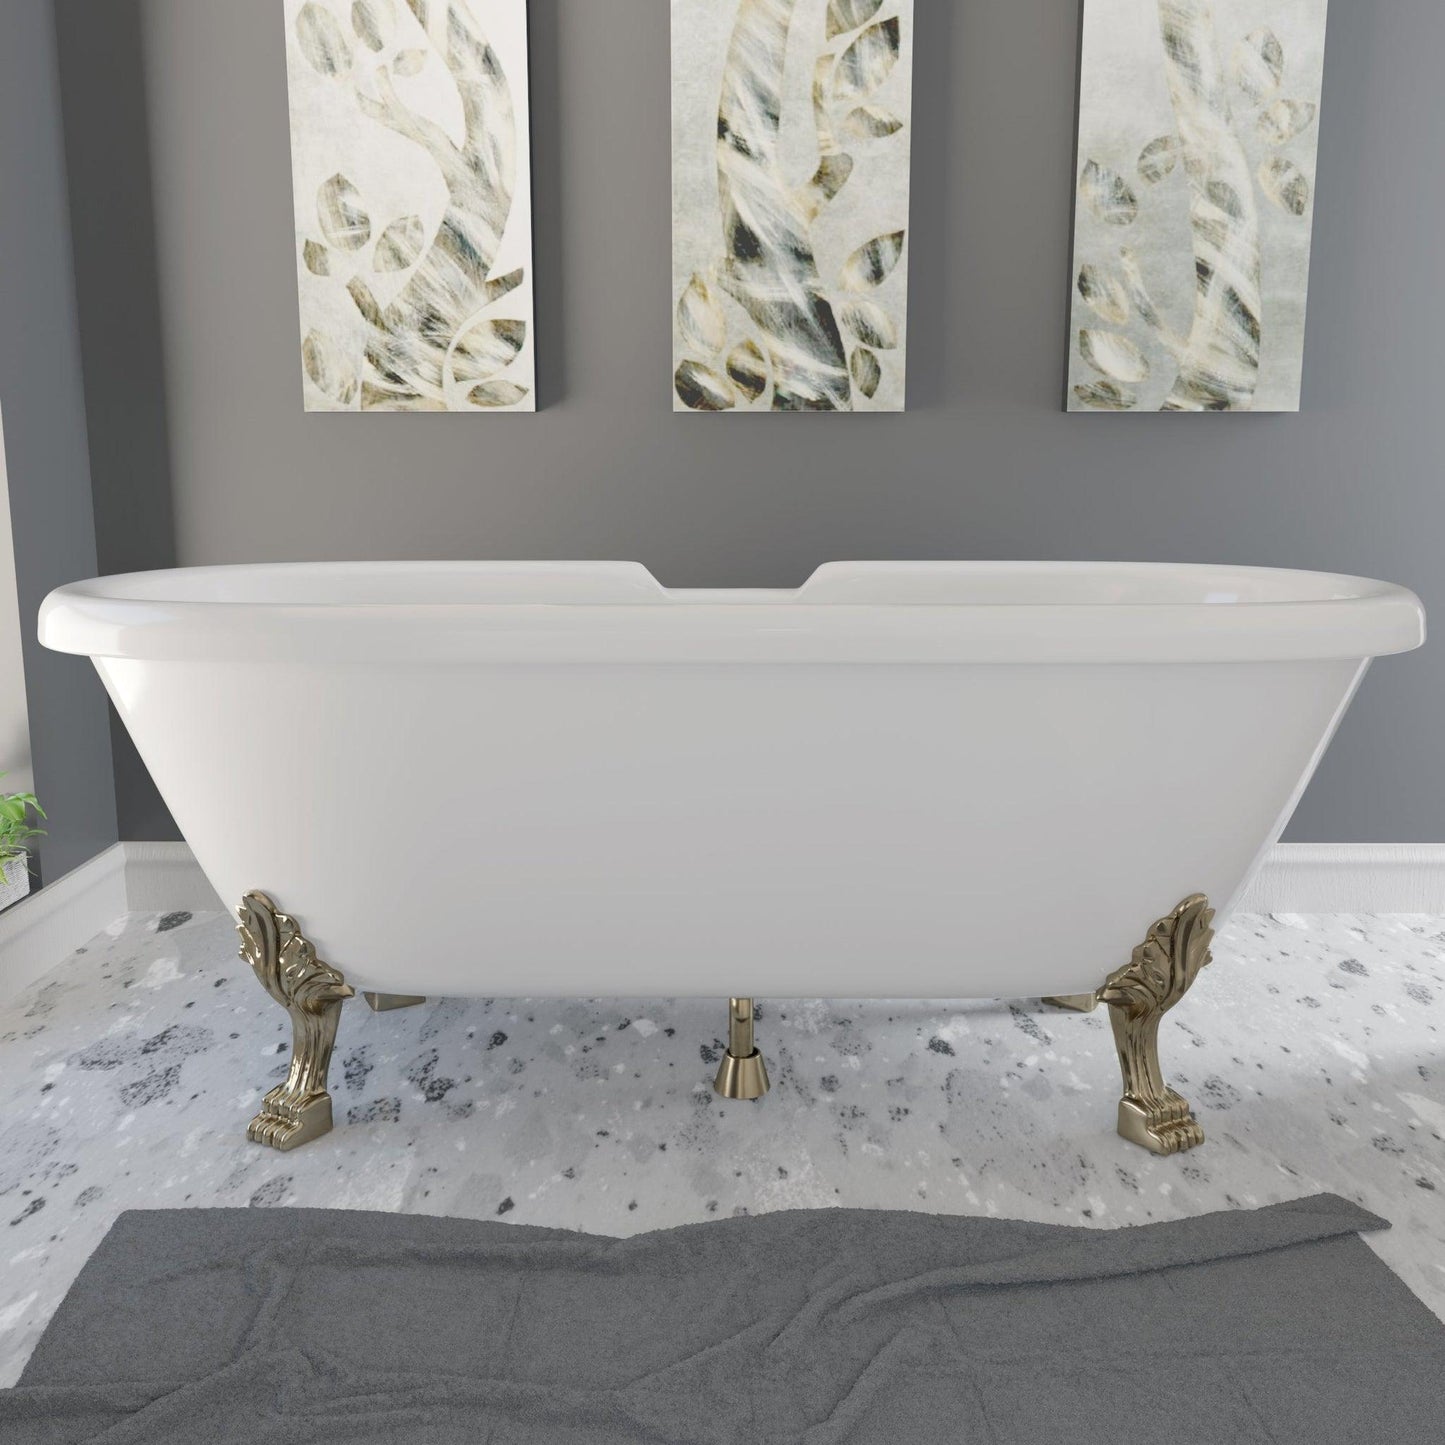 Cambridge Plumbing 69" White Dolomite Mineral Composite Double Ended Bathtub With No Faucet Holes And Antique Brass Lion Paw Feet